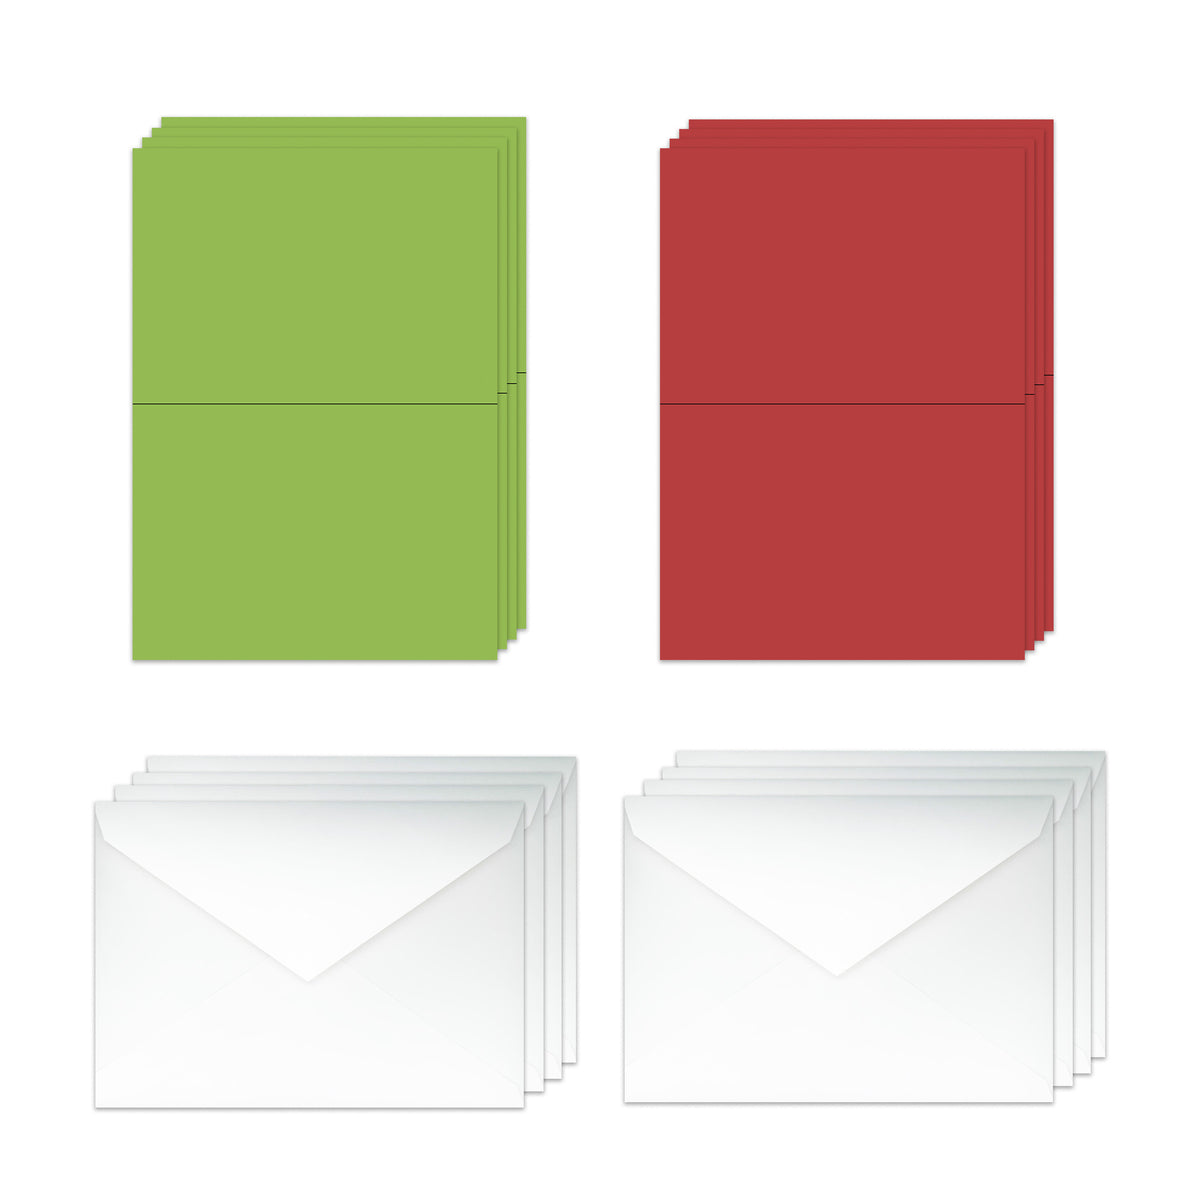 A2 Folded Discount Card Stock and Envelopes  - Red and Green